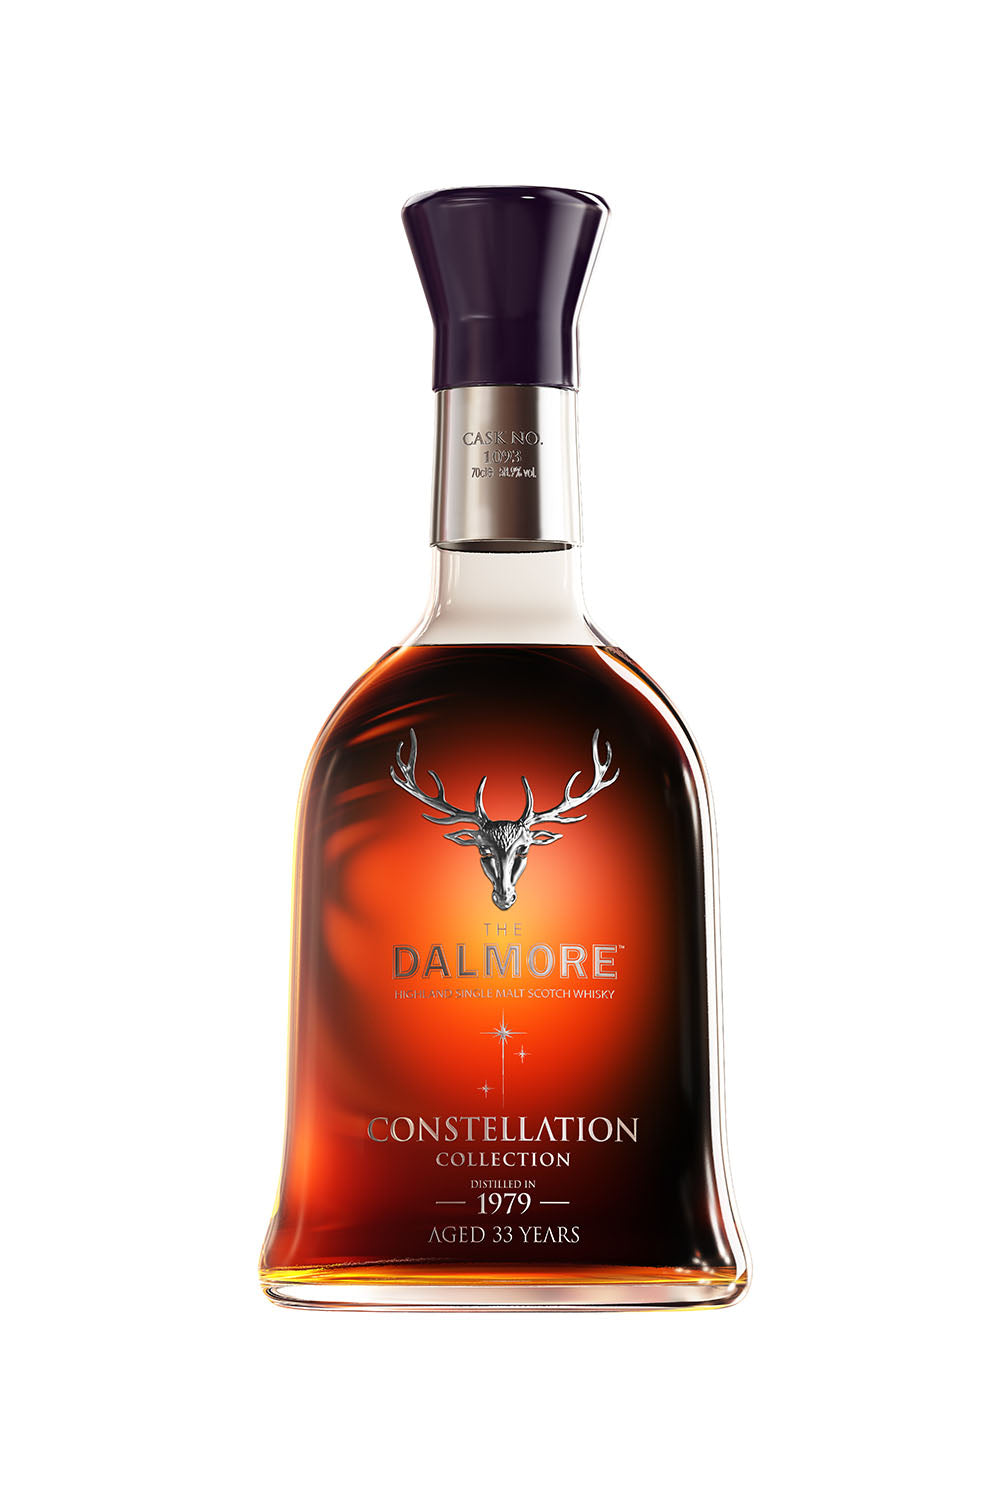 The Dalmore 1979 Constellation - Cask 1093